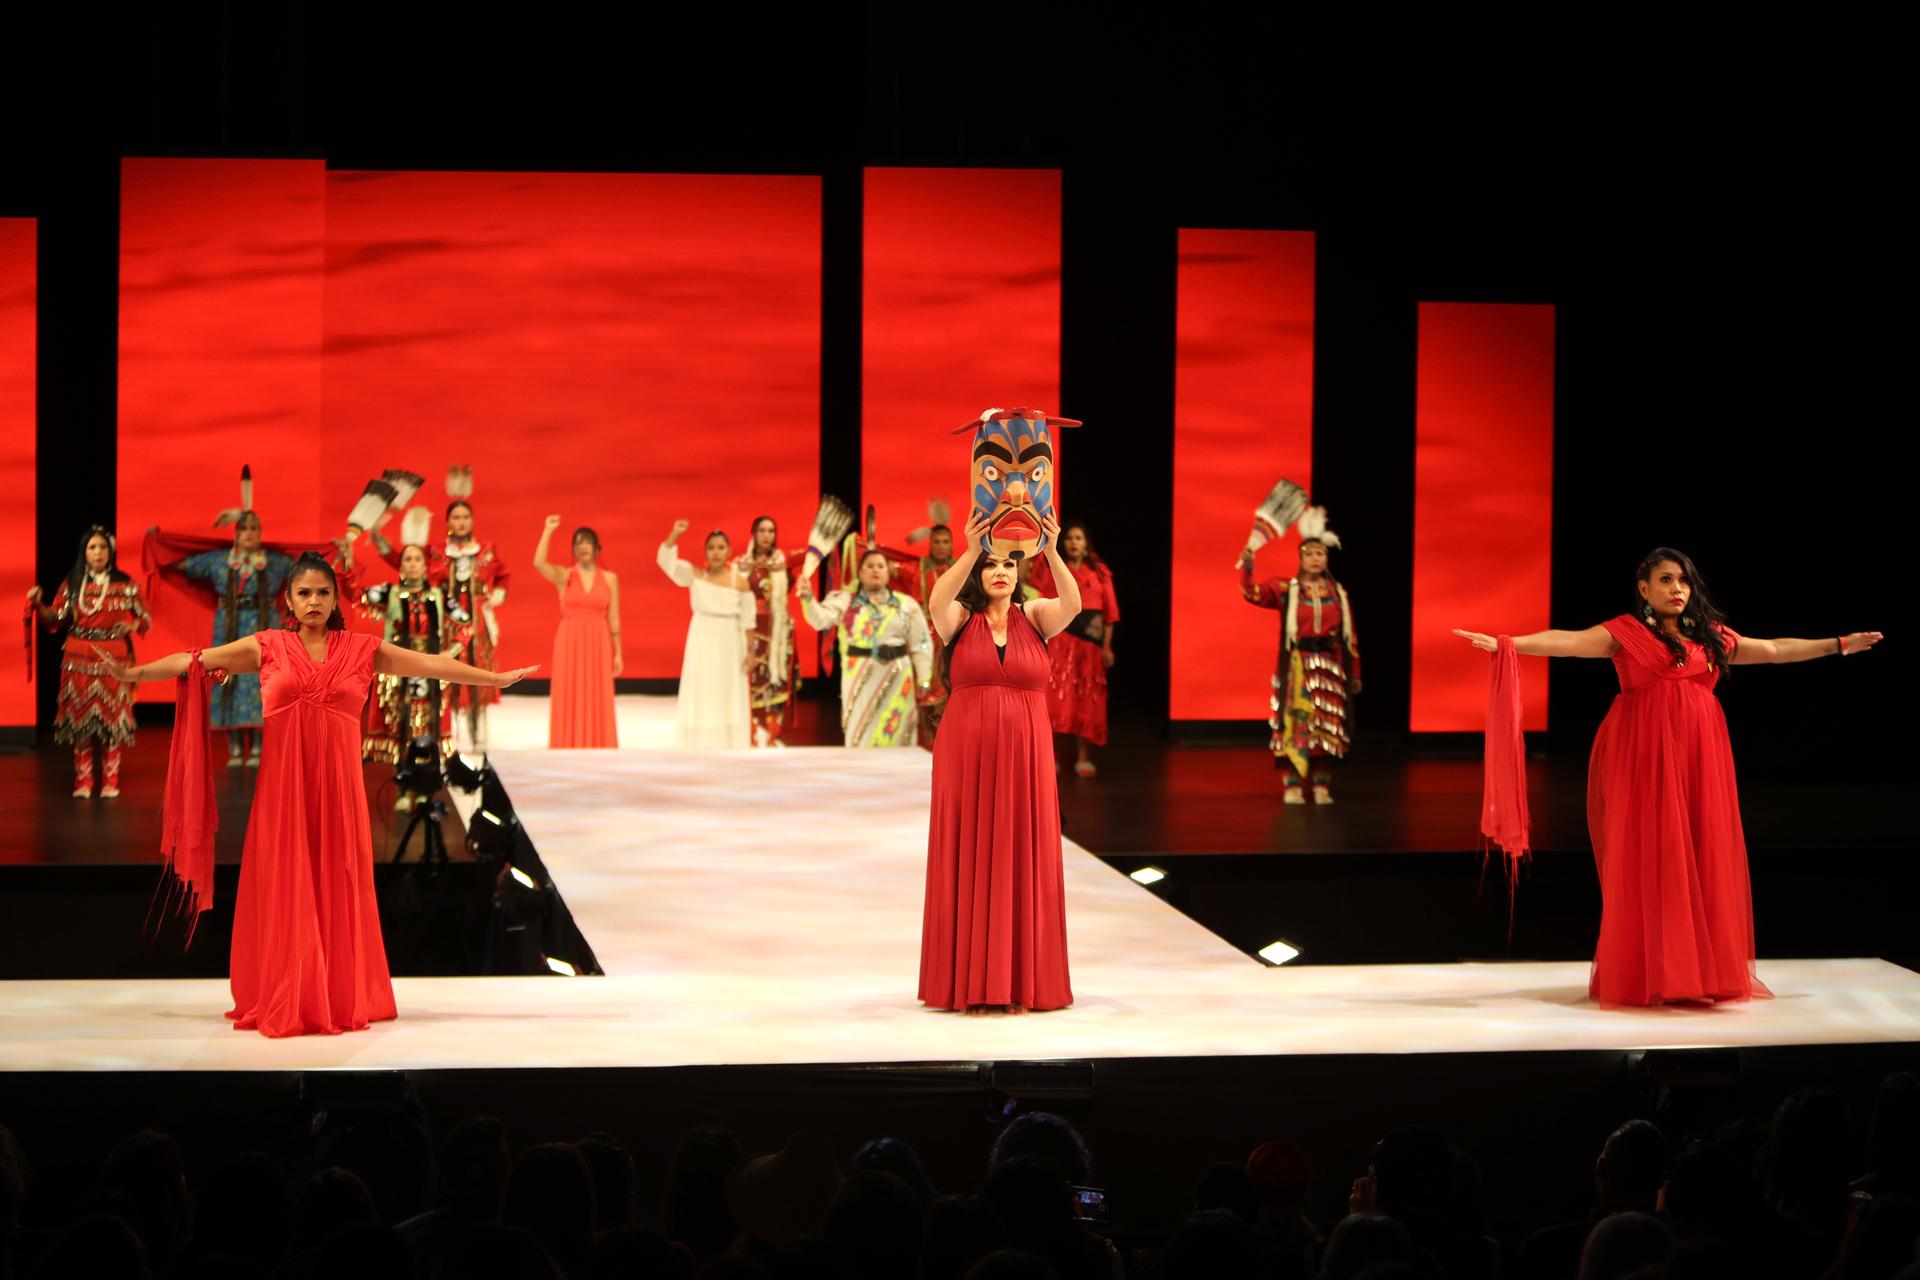 The Red Dress night opened with a powerful depiction of Indigenous female strength and resilience in a dance choreographed by Madelaine McCallum (center).